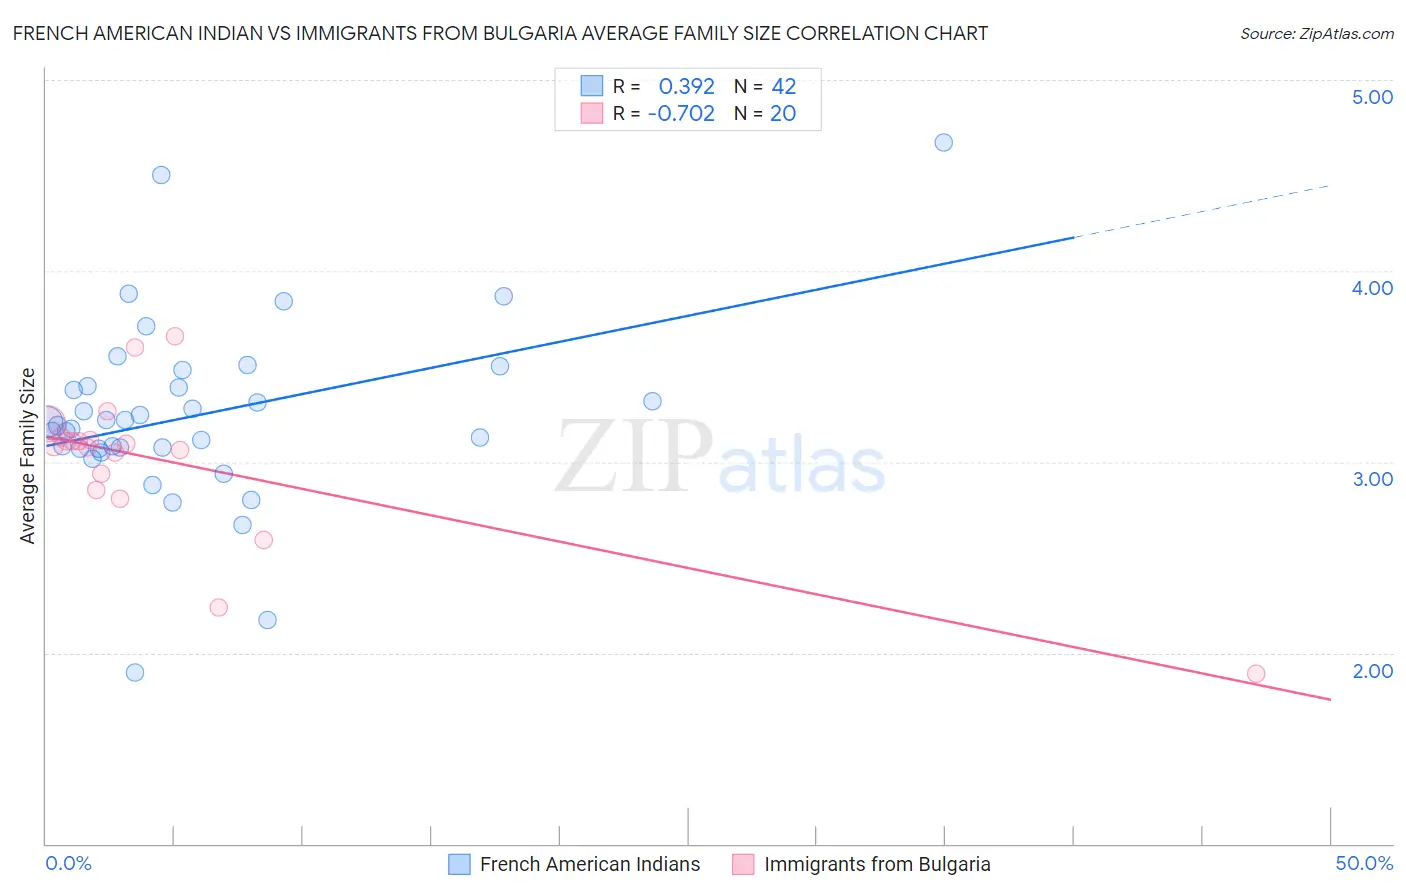 French American Indian vs Immigrants from Bulgaria Average Family Size